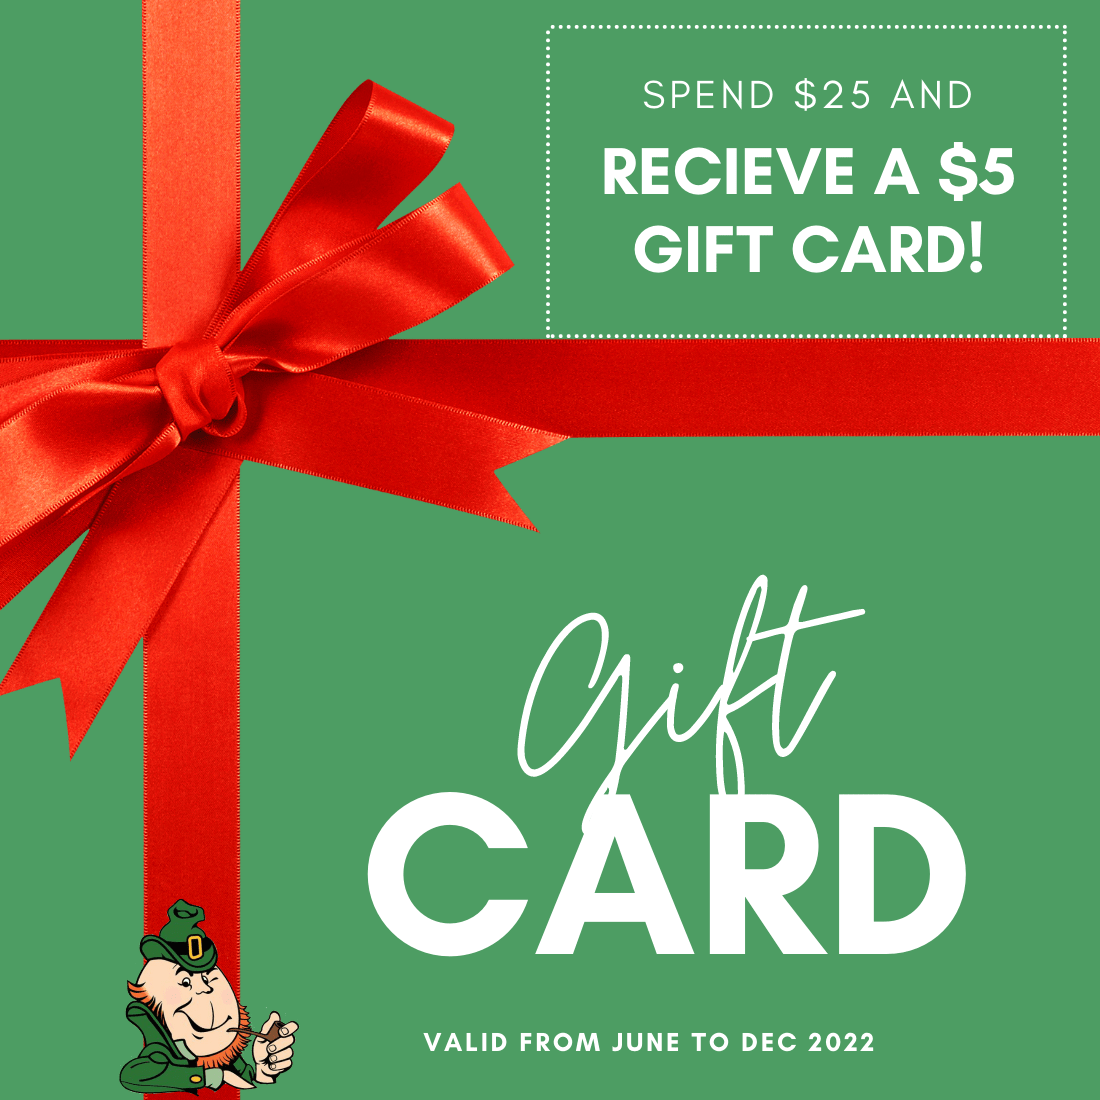 https://maggieobriens.com/wp-content/uploads/2022/06/5-gift-card.png